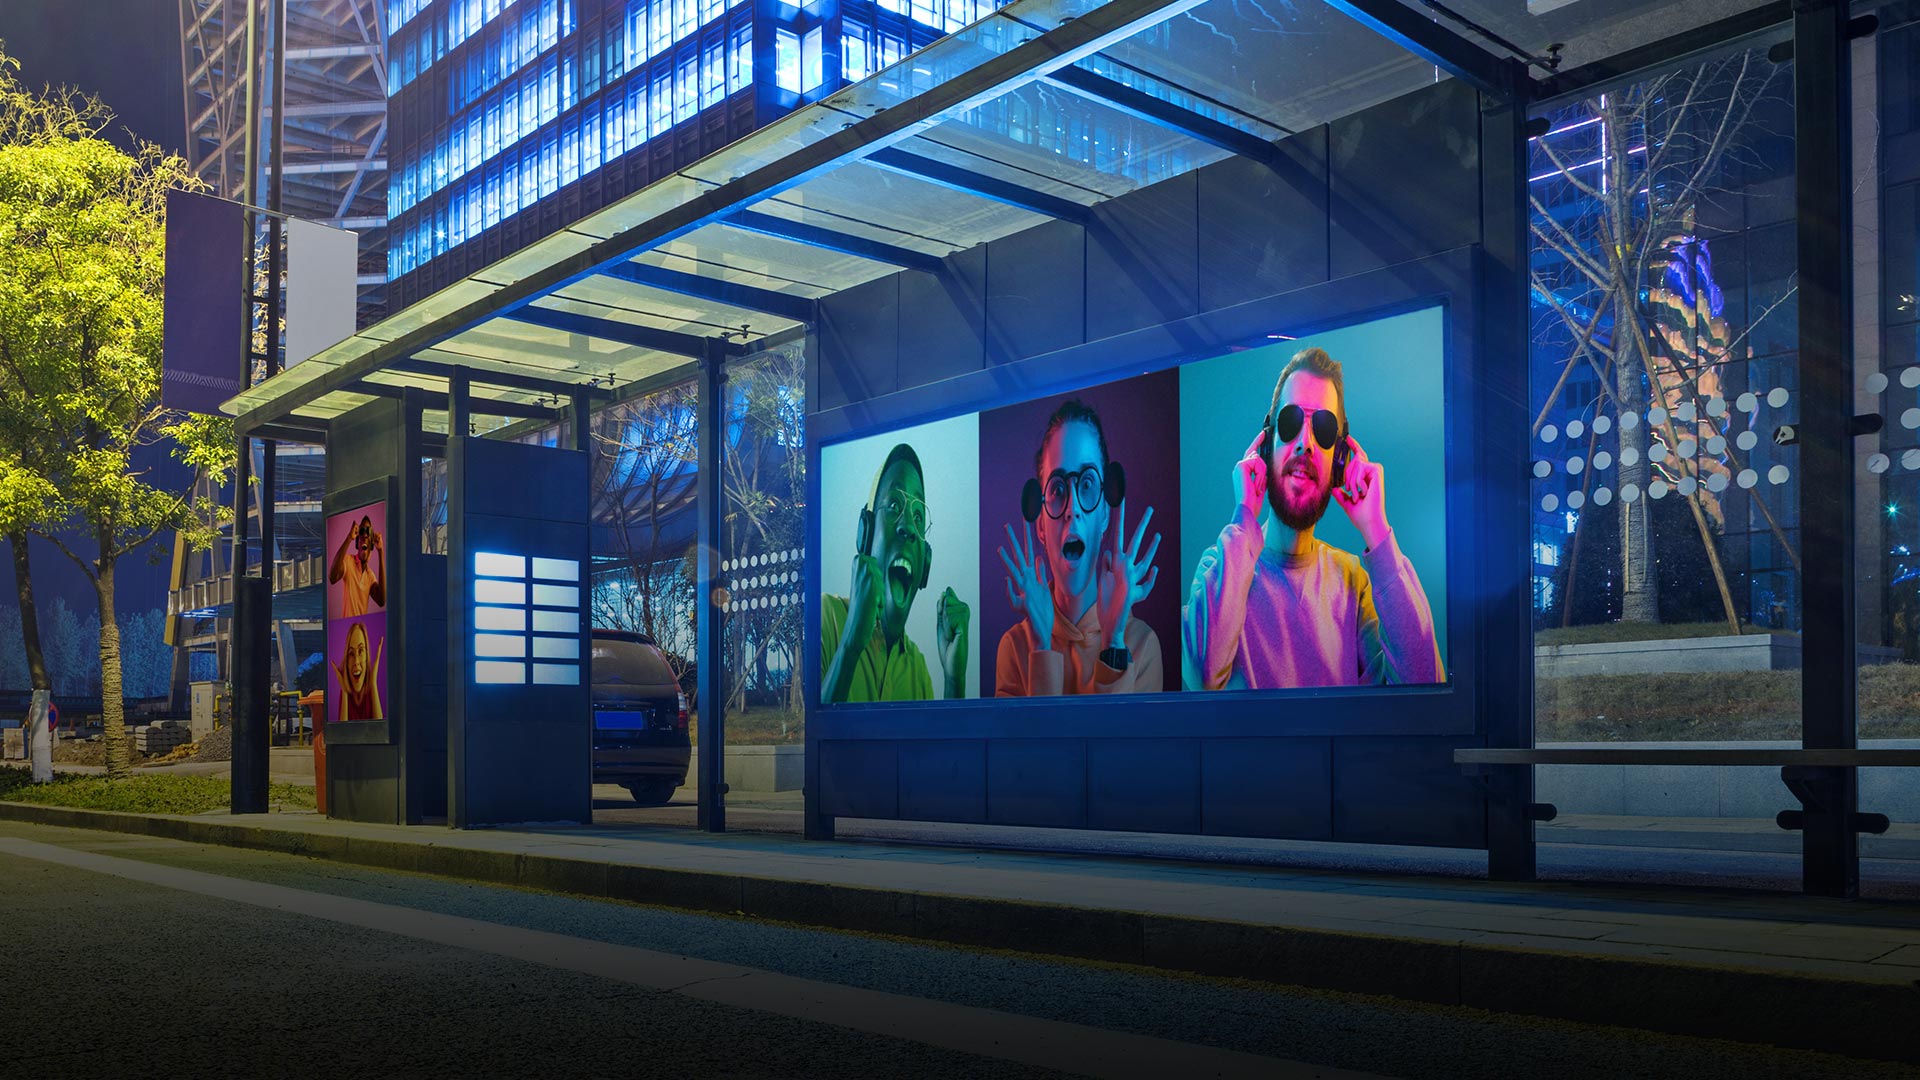 DOOH (Digital Out of Home) Advertising - Intel